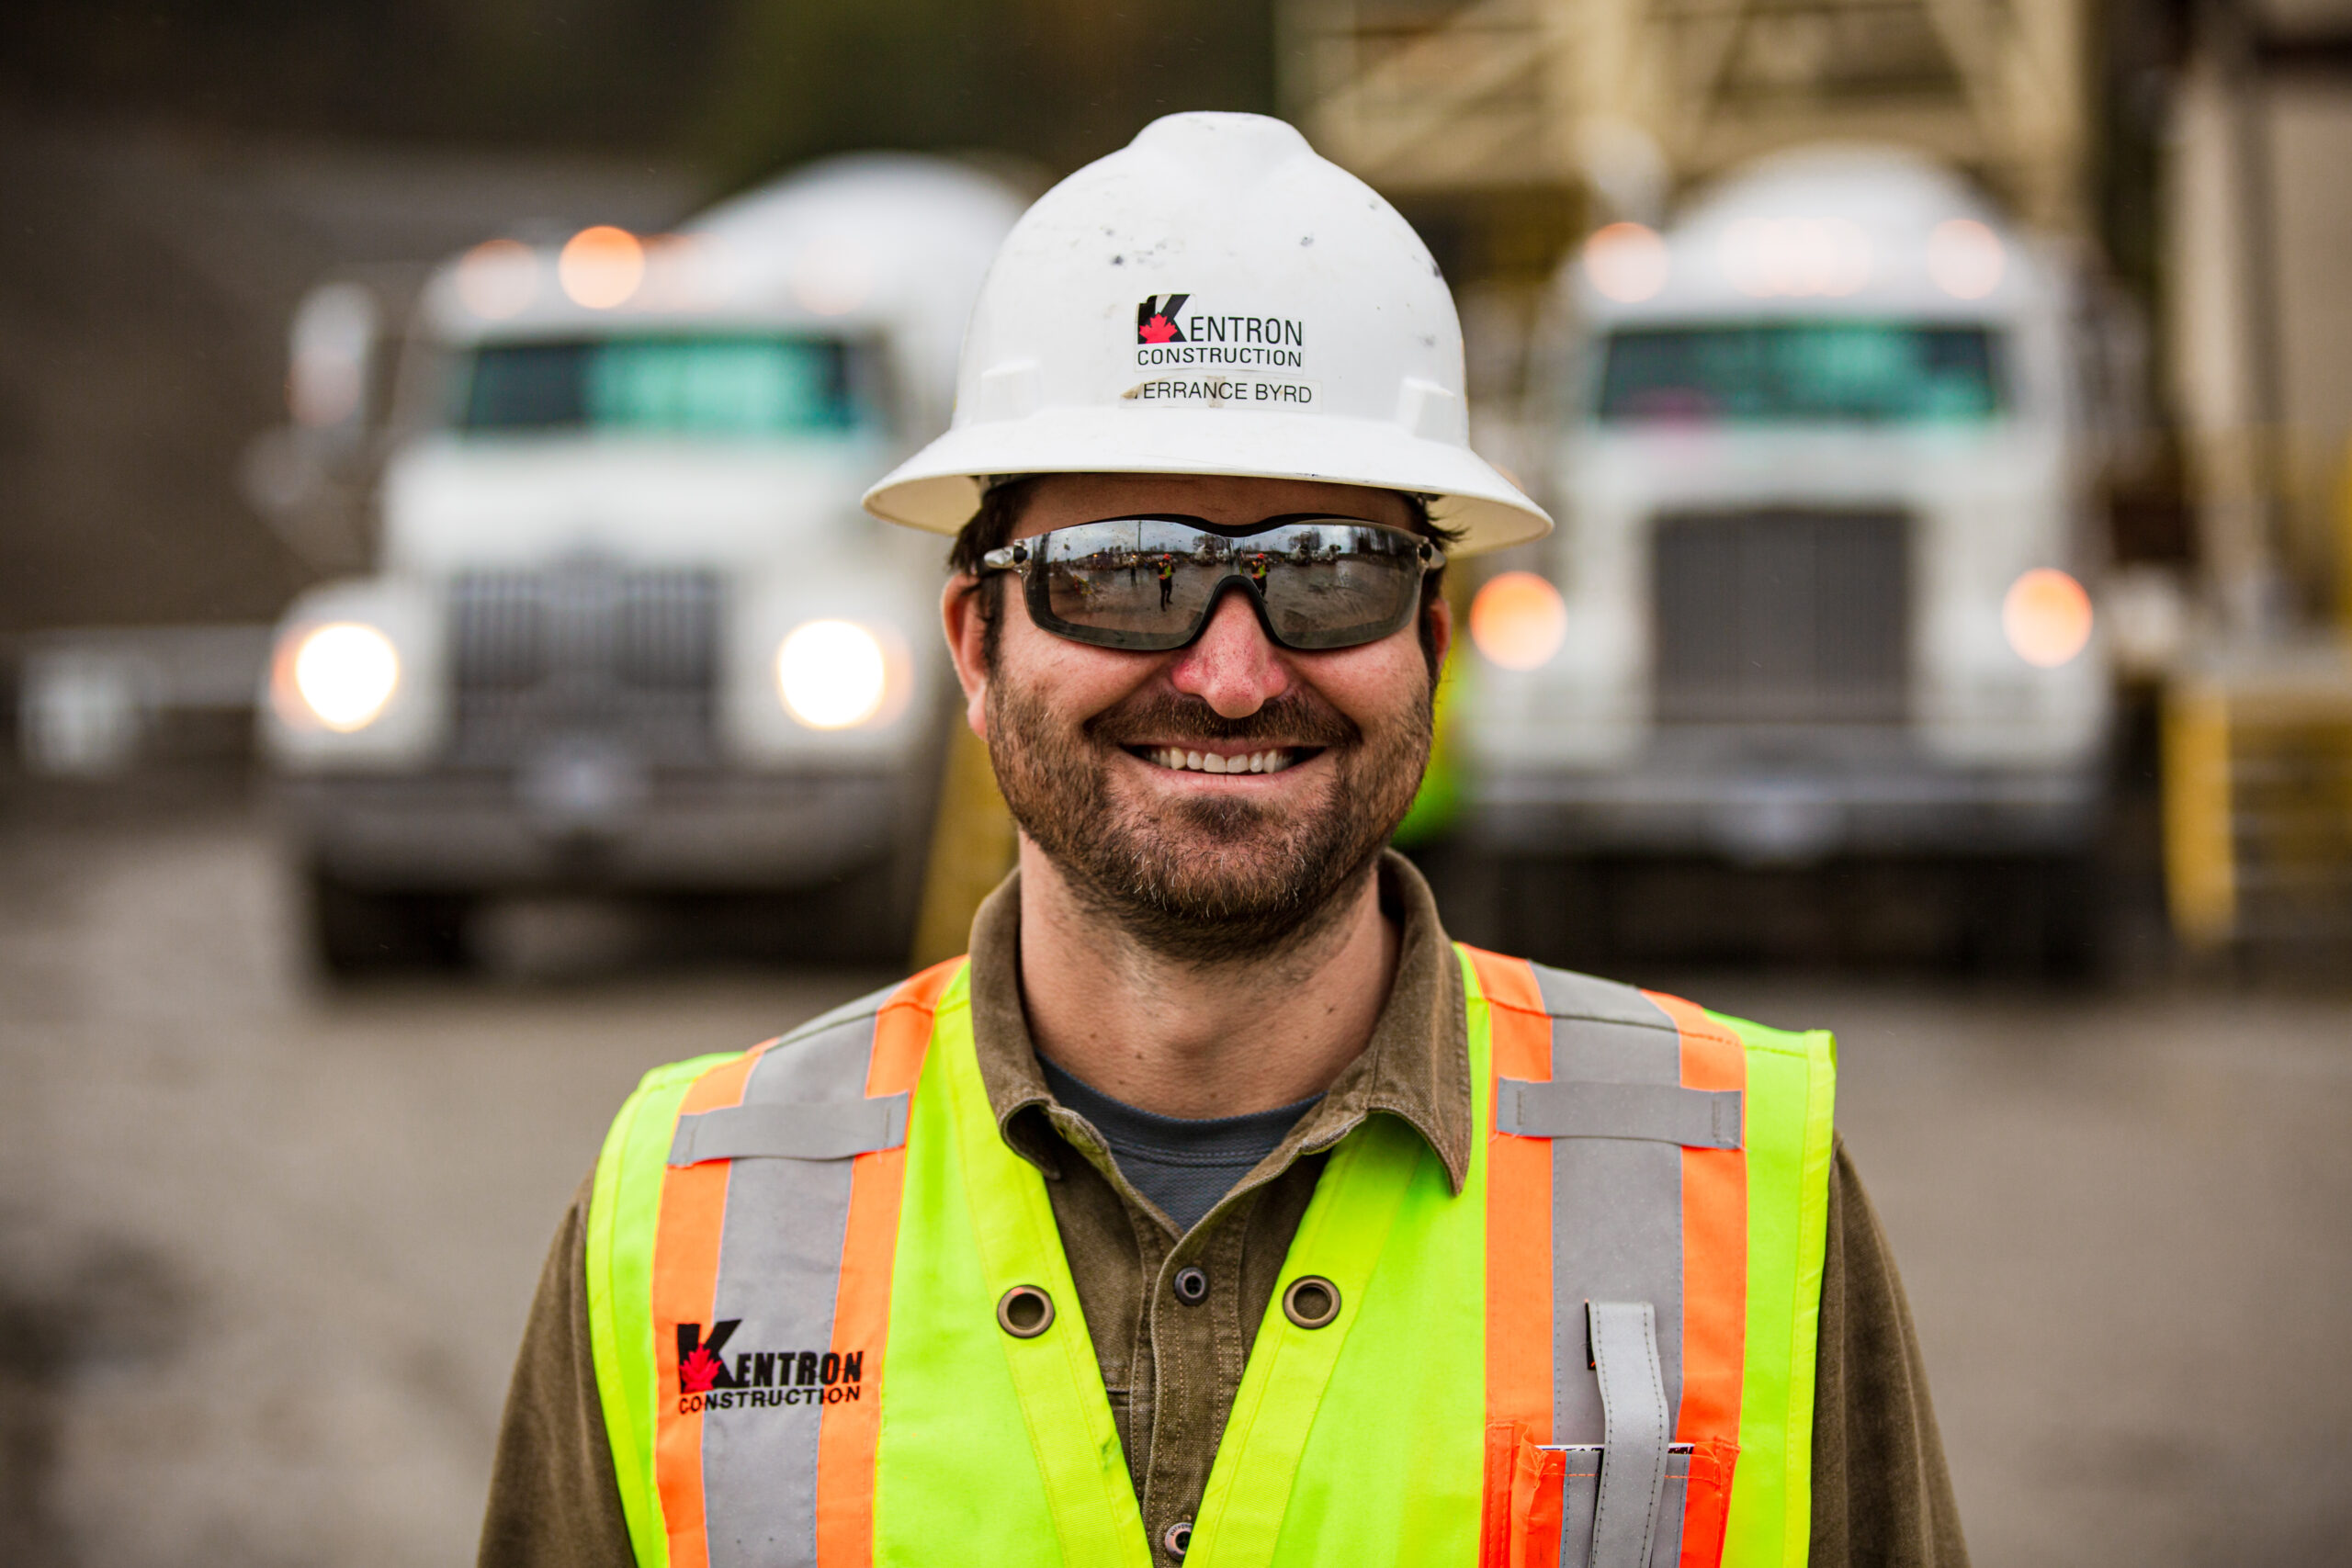 A smiling male construction worker on a job site